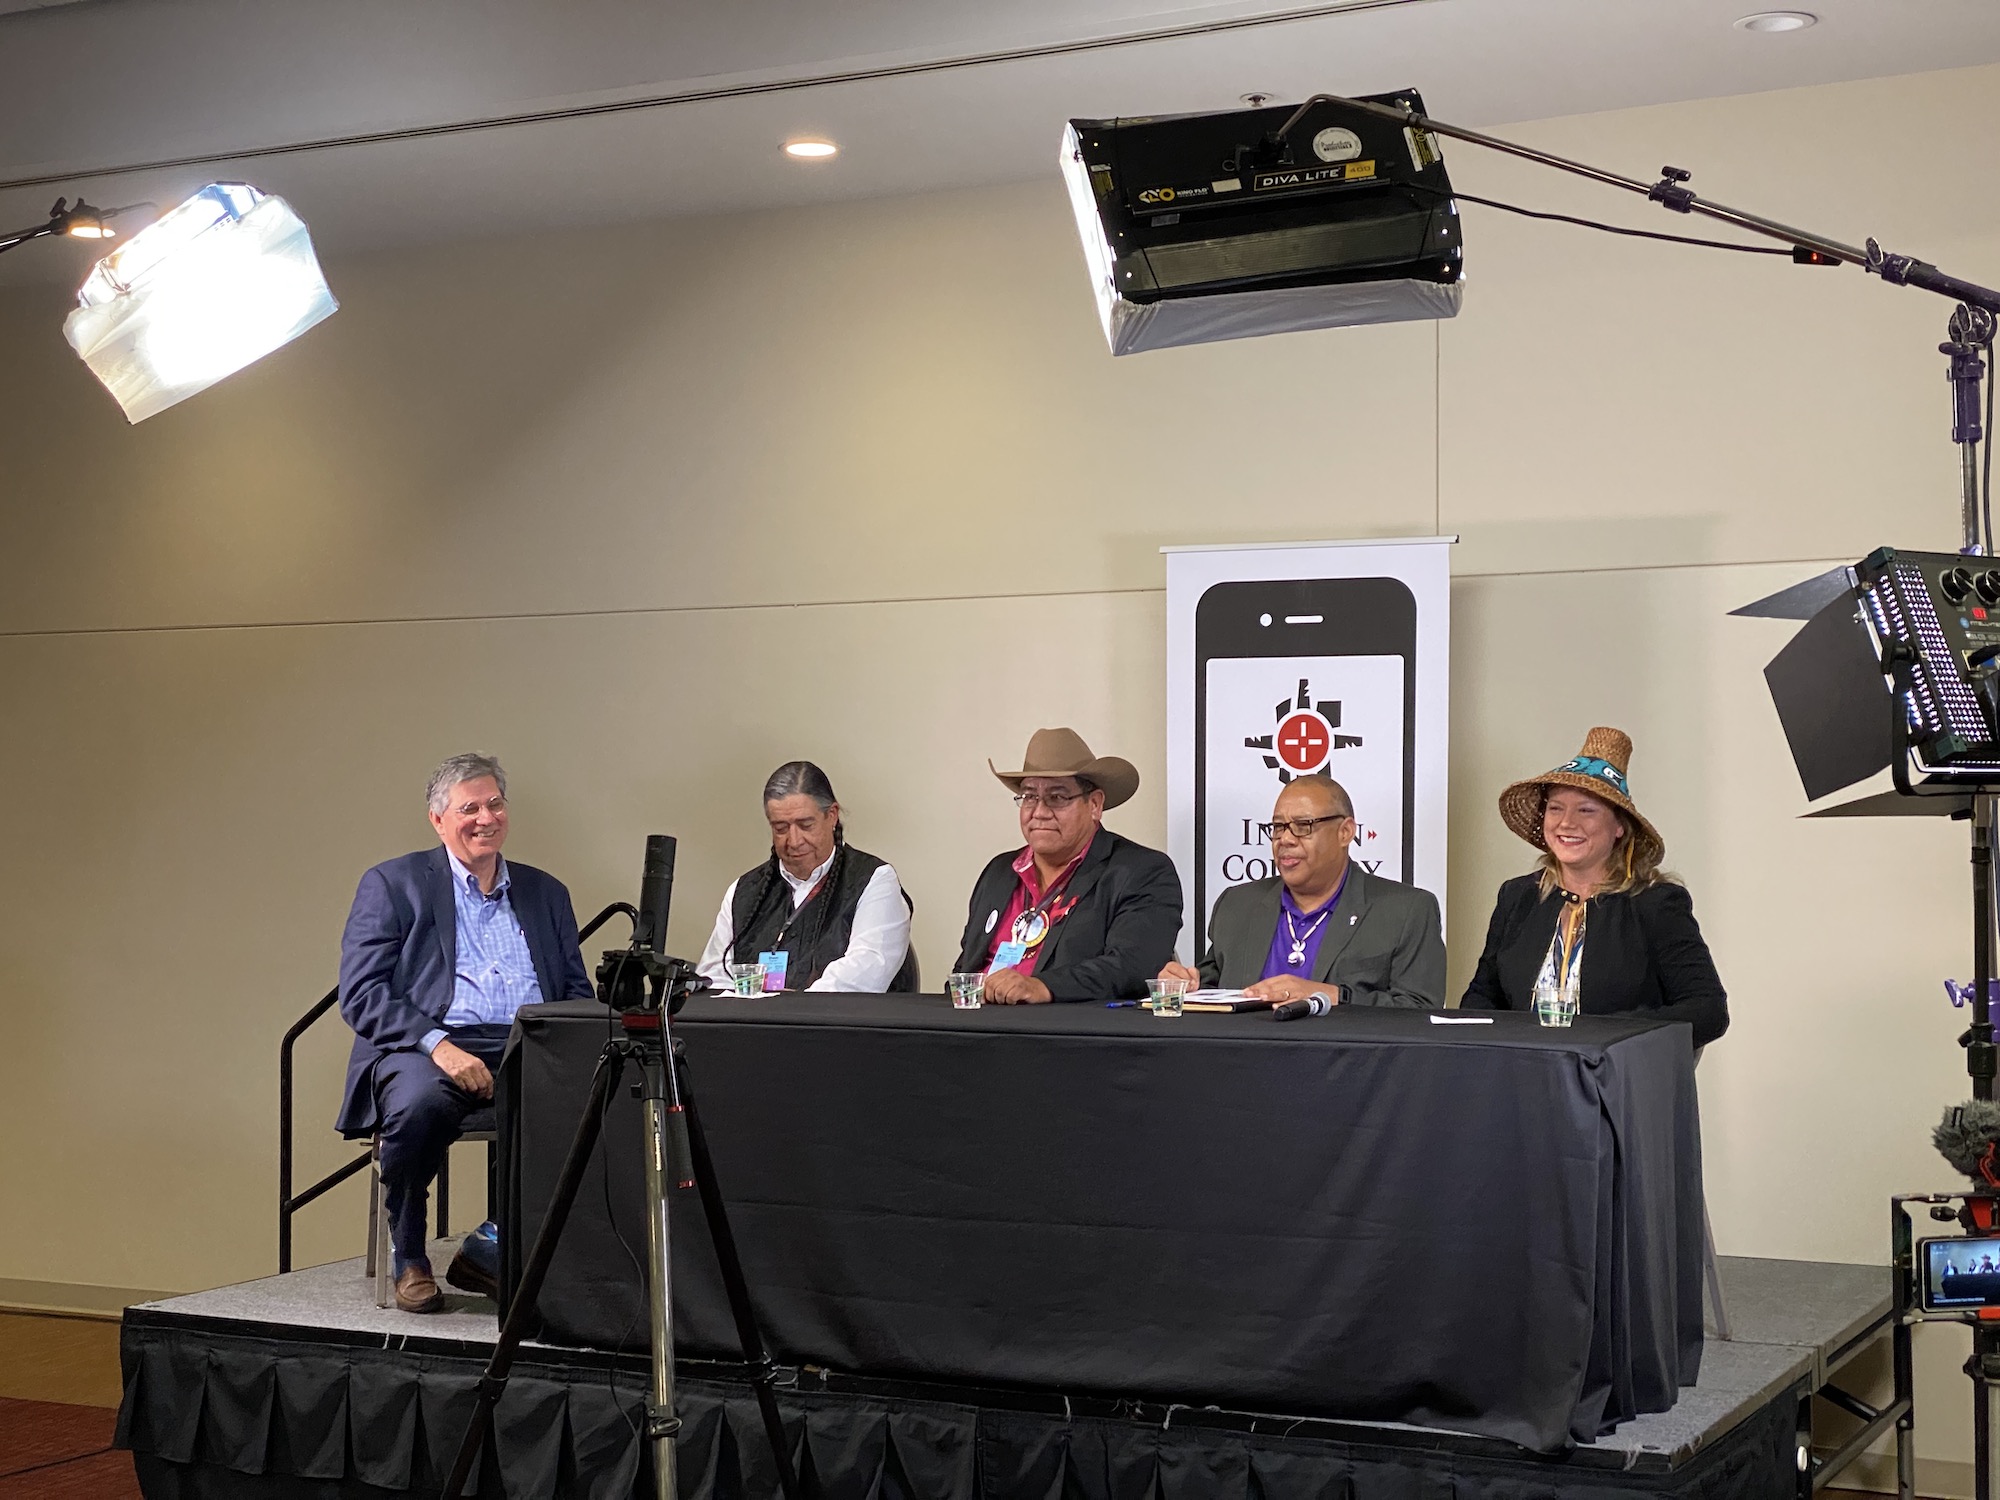 RECAP: National Congress of American Indians annual convention #NCAIAnnual19